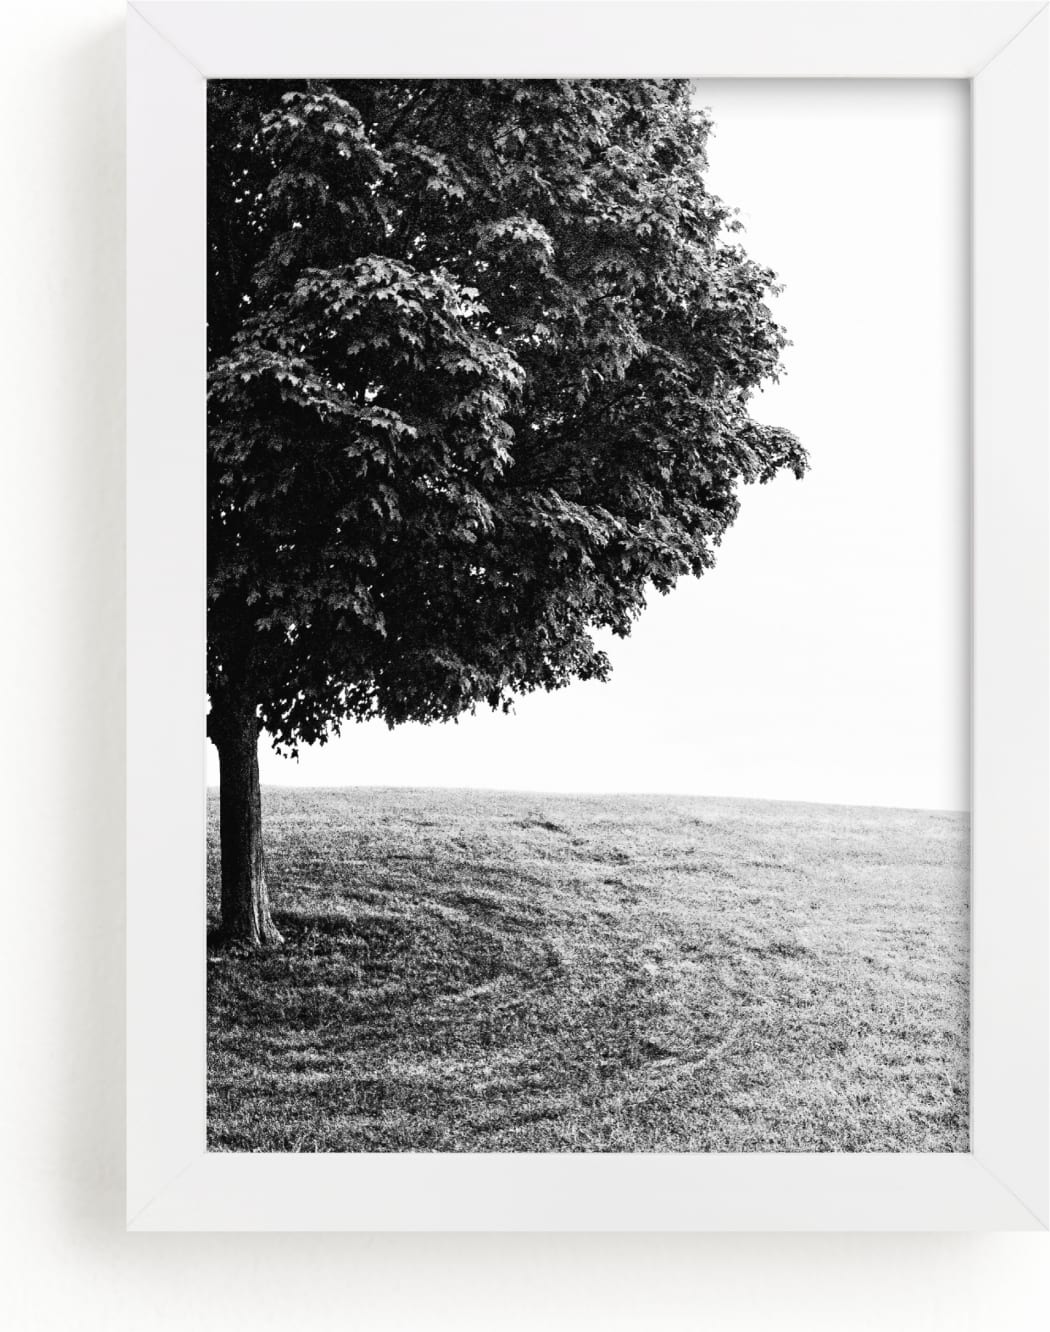 This is a black and white art by Eric Ransom called Tree on the Hill .